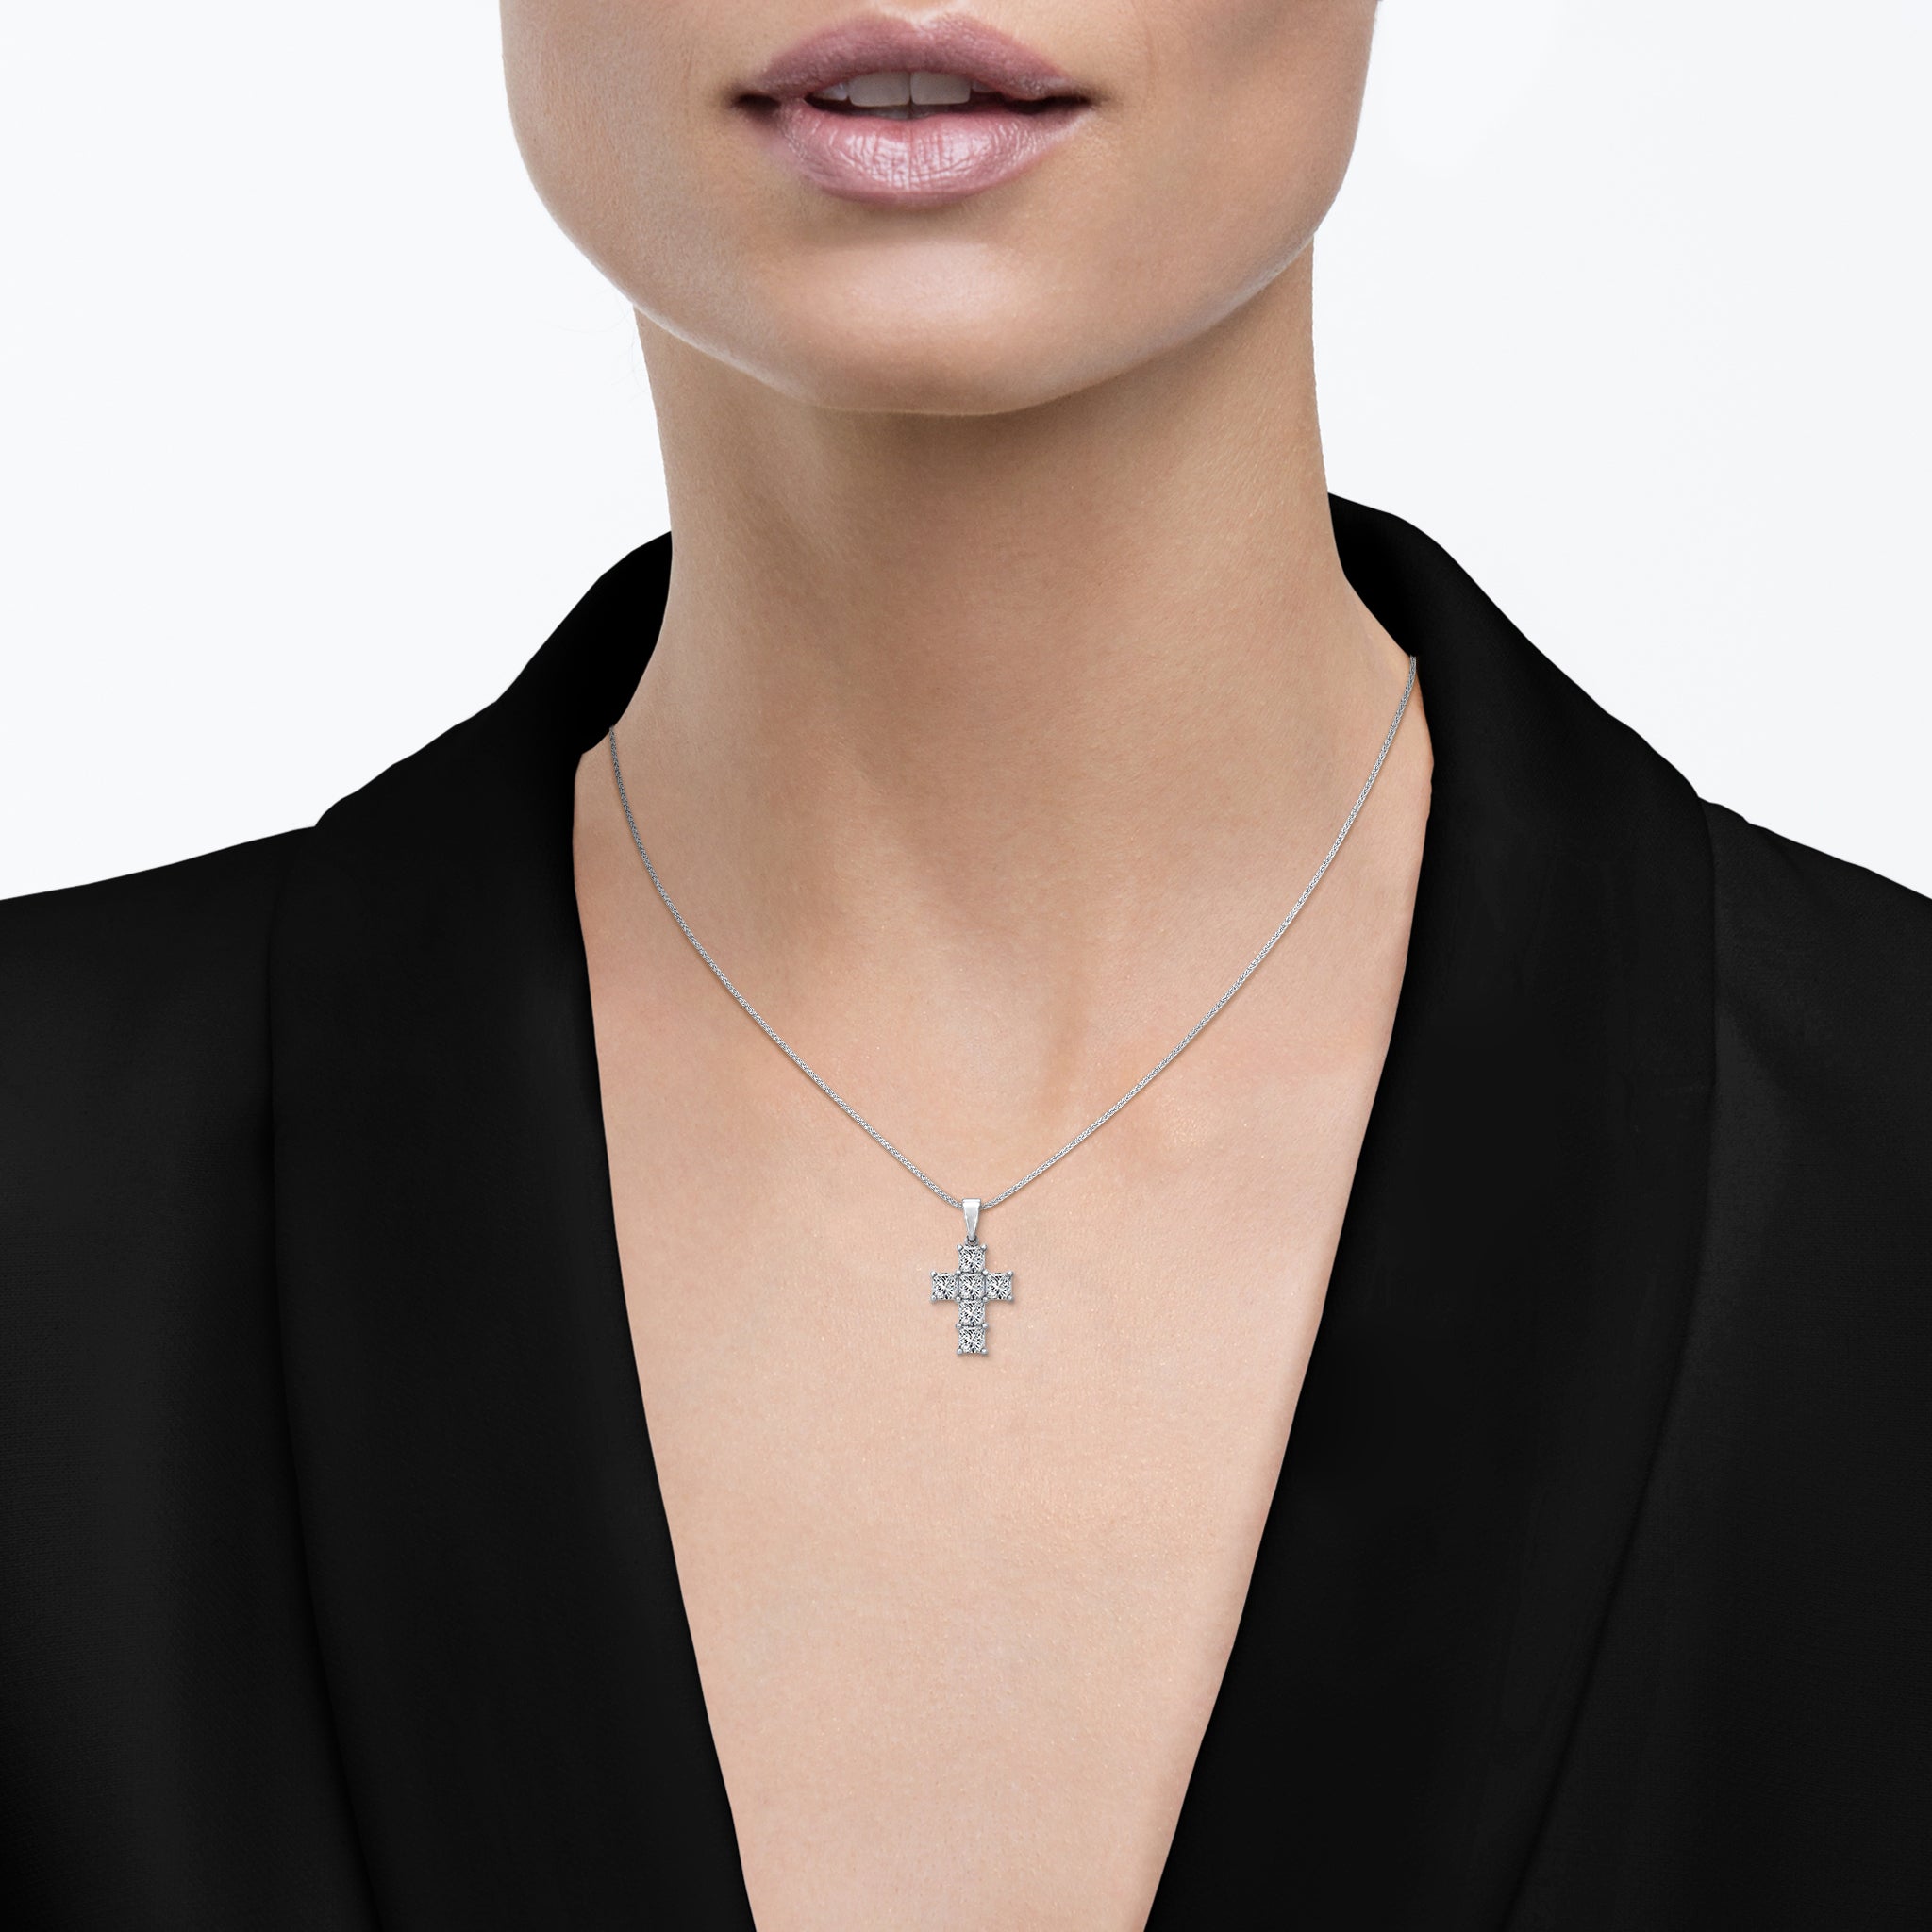 Shimansky - Women Wearing the My Girl Diamond Cross Pendant 1.00ct Crafted in 18K White Gold